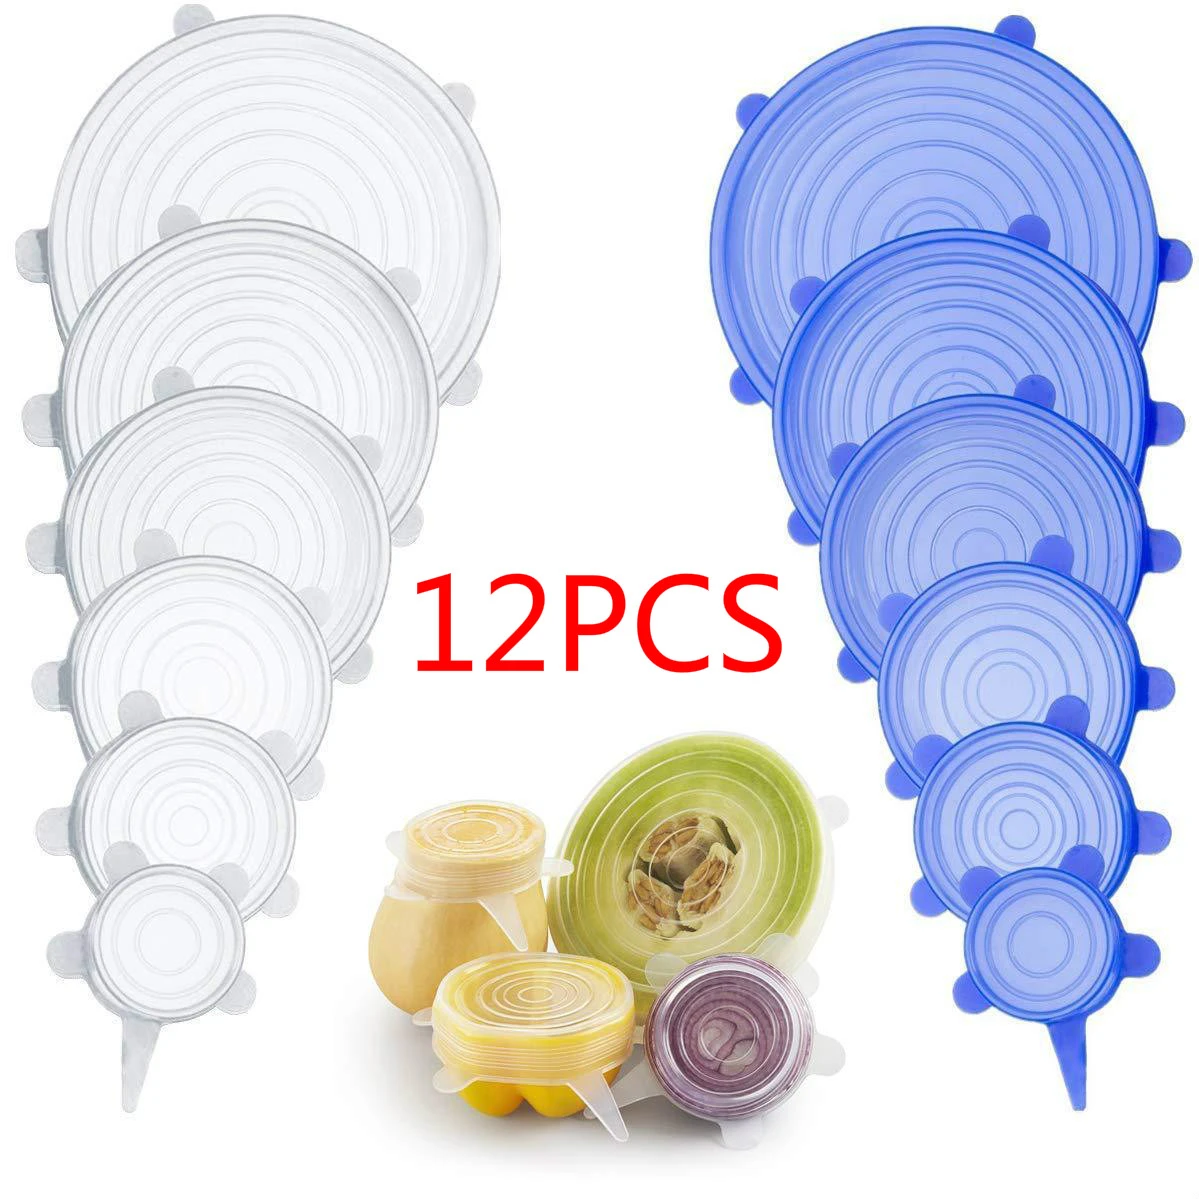 6/12PCS Silicone Stretch Lids Universal Silicone Food Wrap Bowl Pot Lid Silicone Cover Pan Cooking Kitchen Accessories